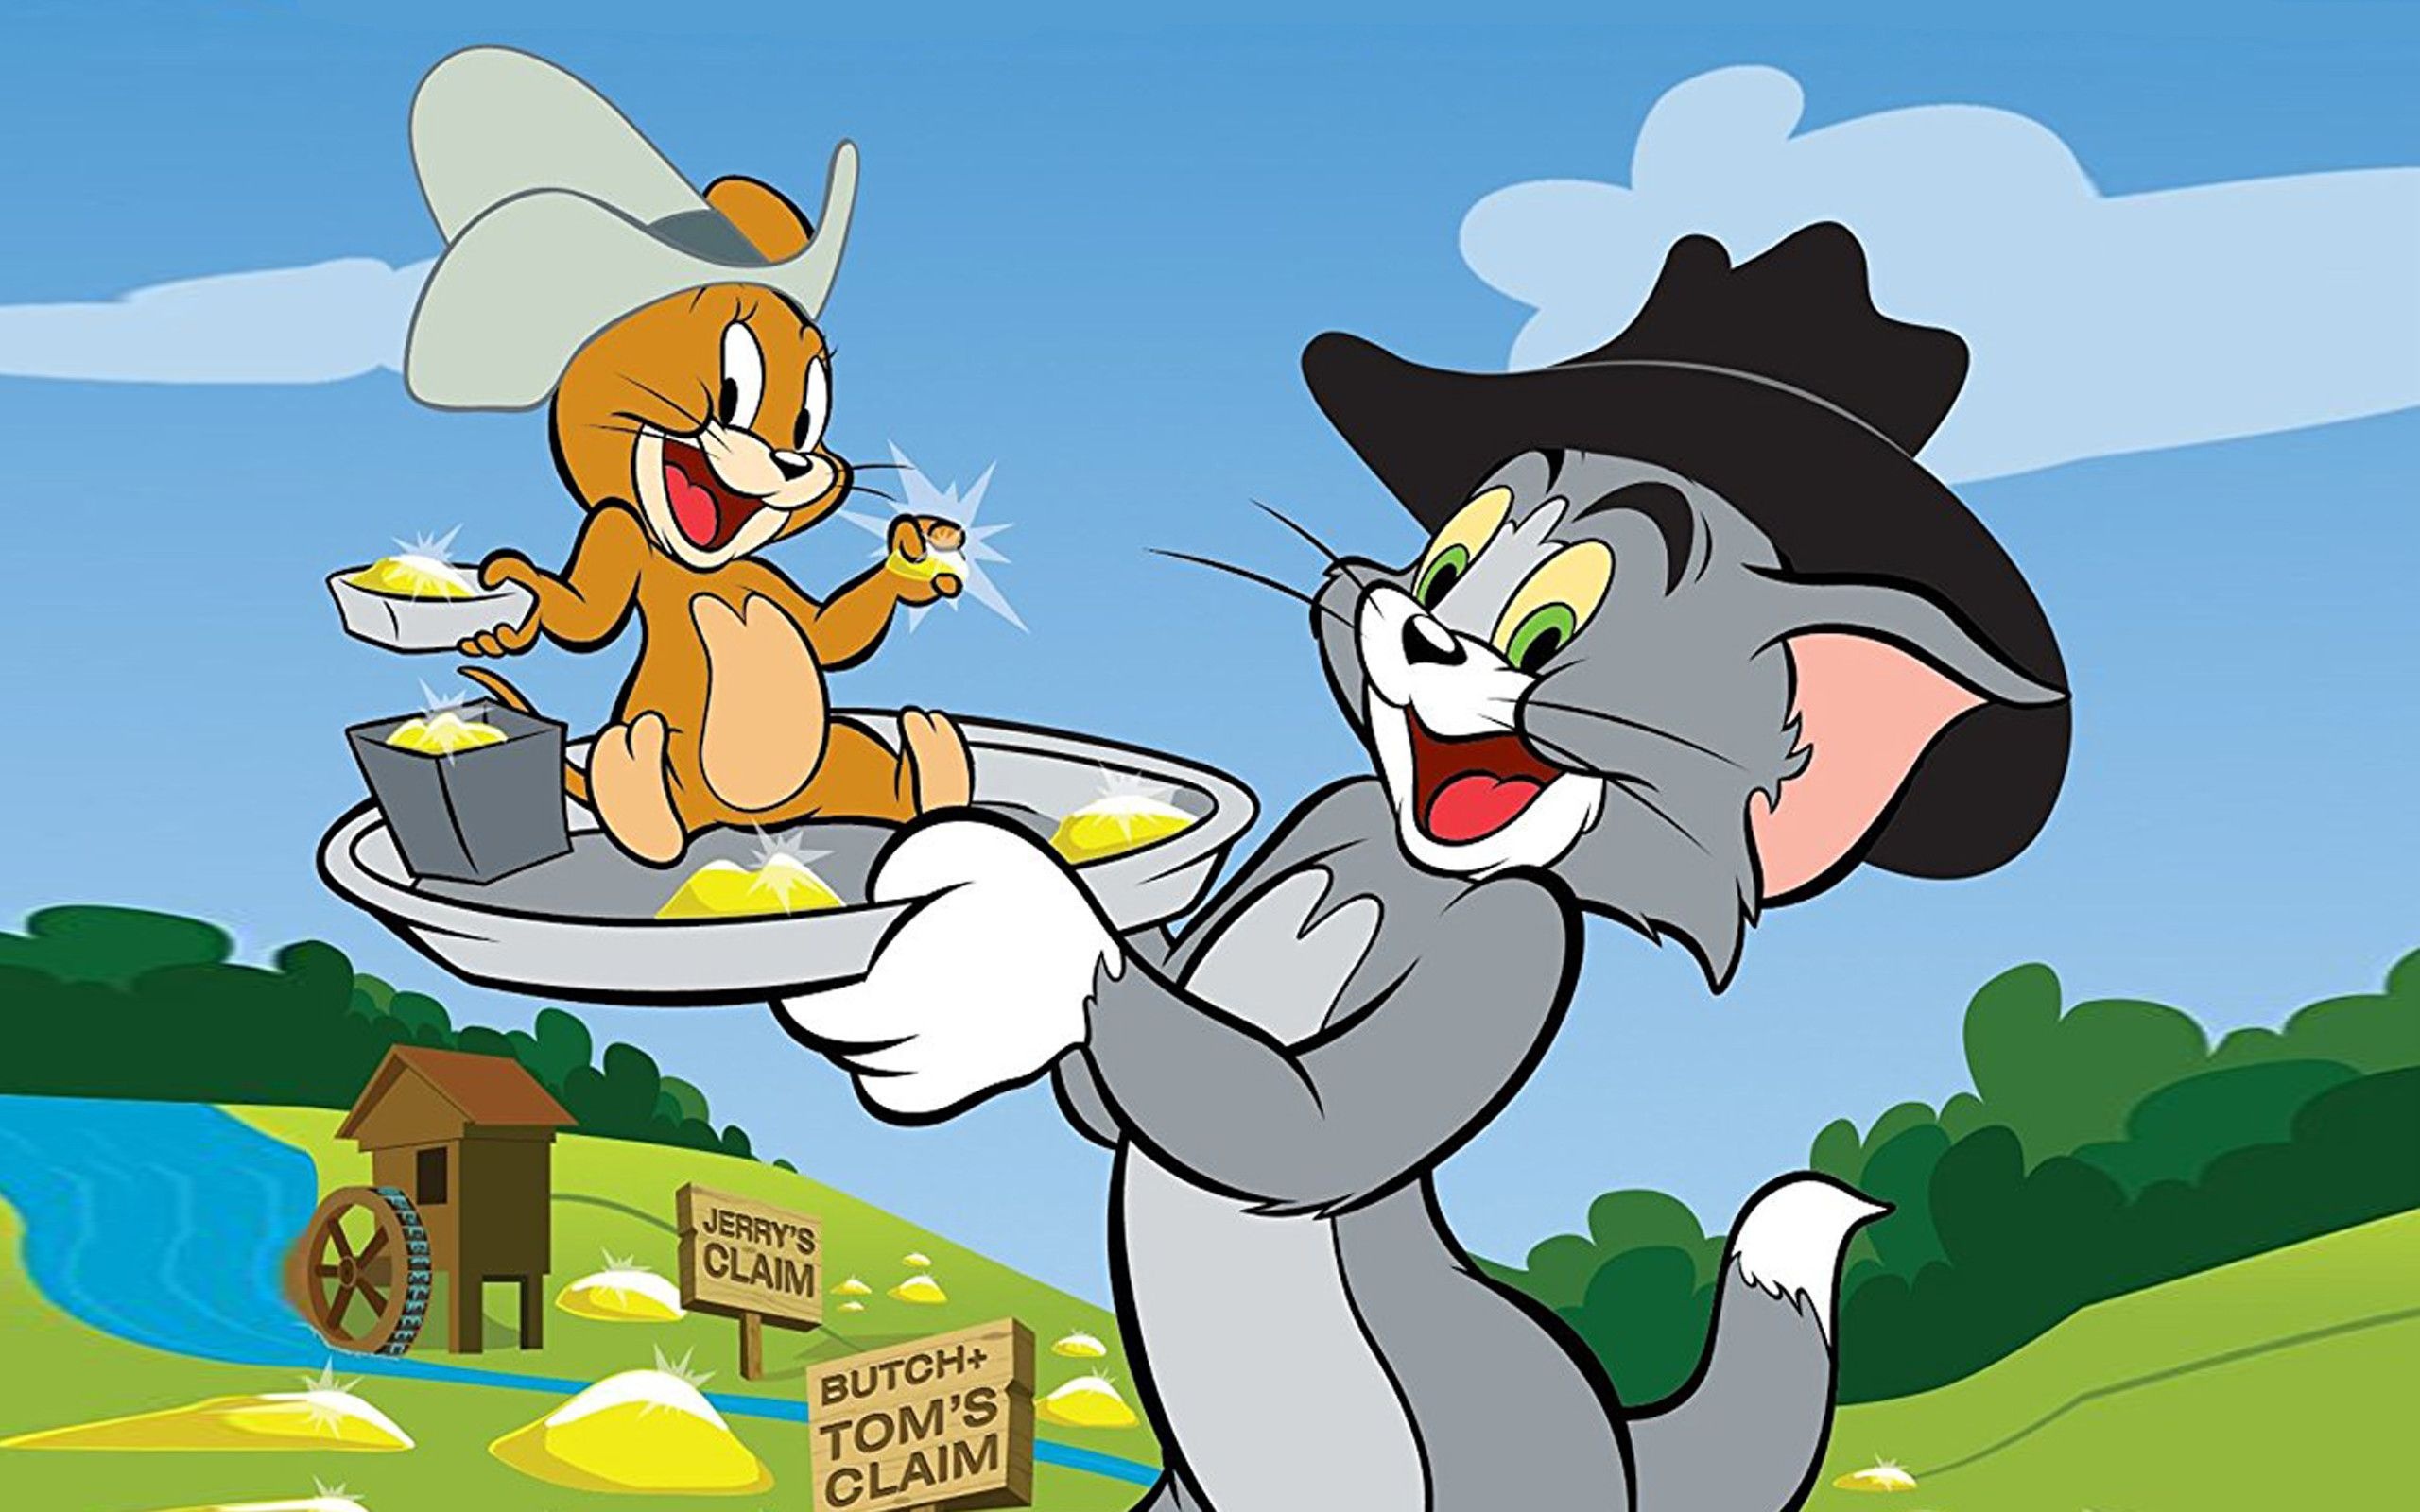 Tom and Jerry wallpaper, Classic animation, Beloved characters, Quirky humor, 2560x1600 HD Desktop